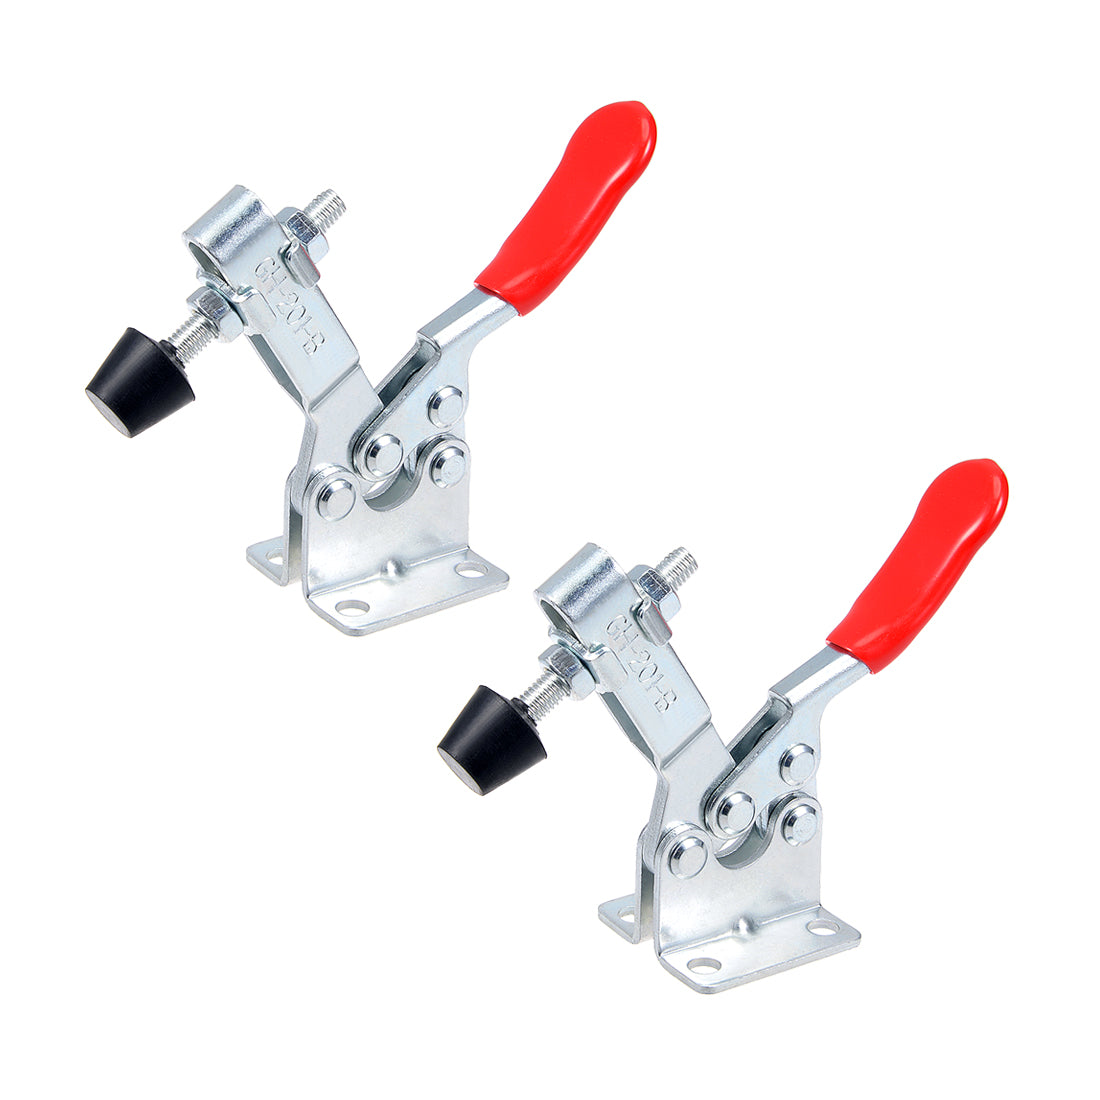 uxcell Uxcell Toggle Clamp GH-201-B Horizontal Clamp Quick Release Tool 90Kg 198lbs Capacity 2pcs